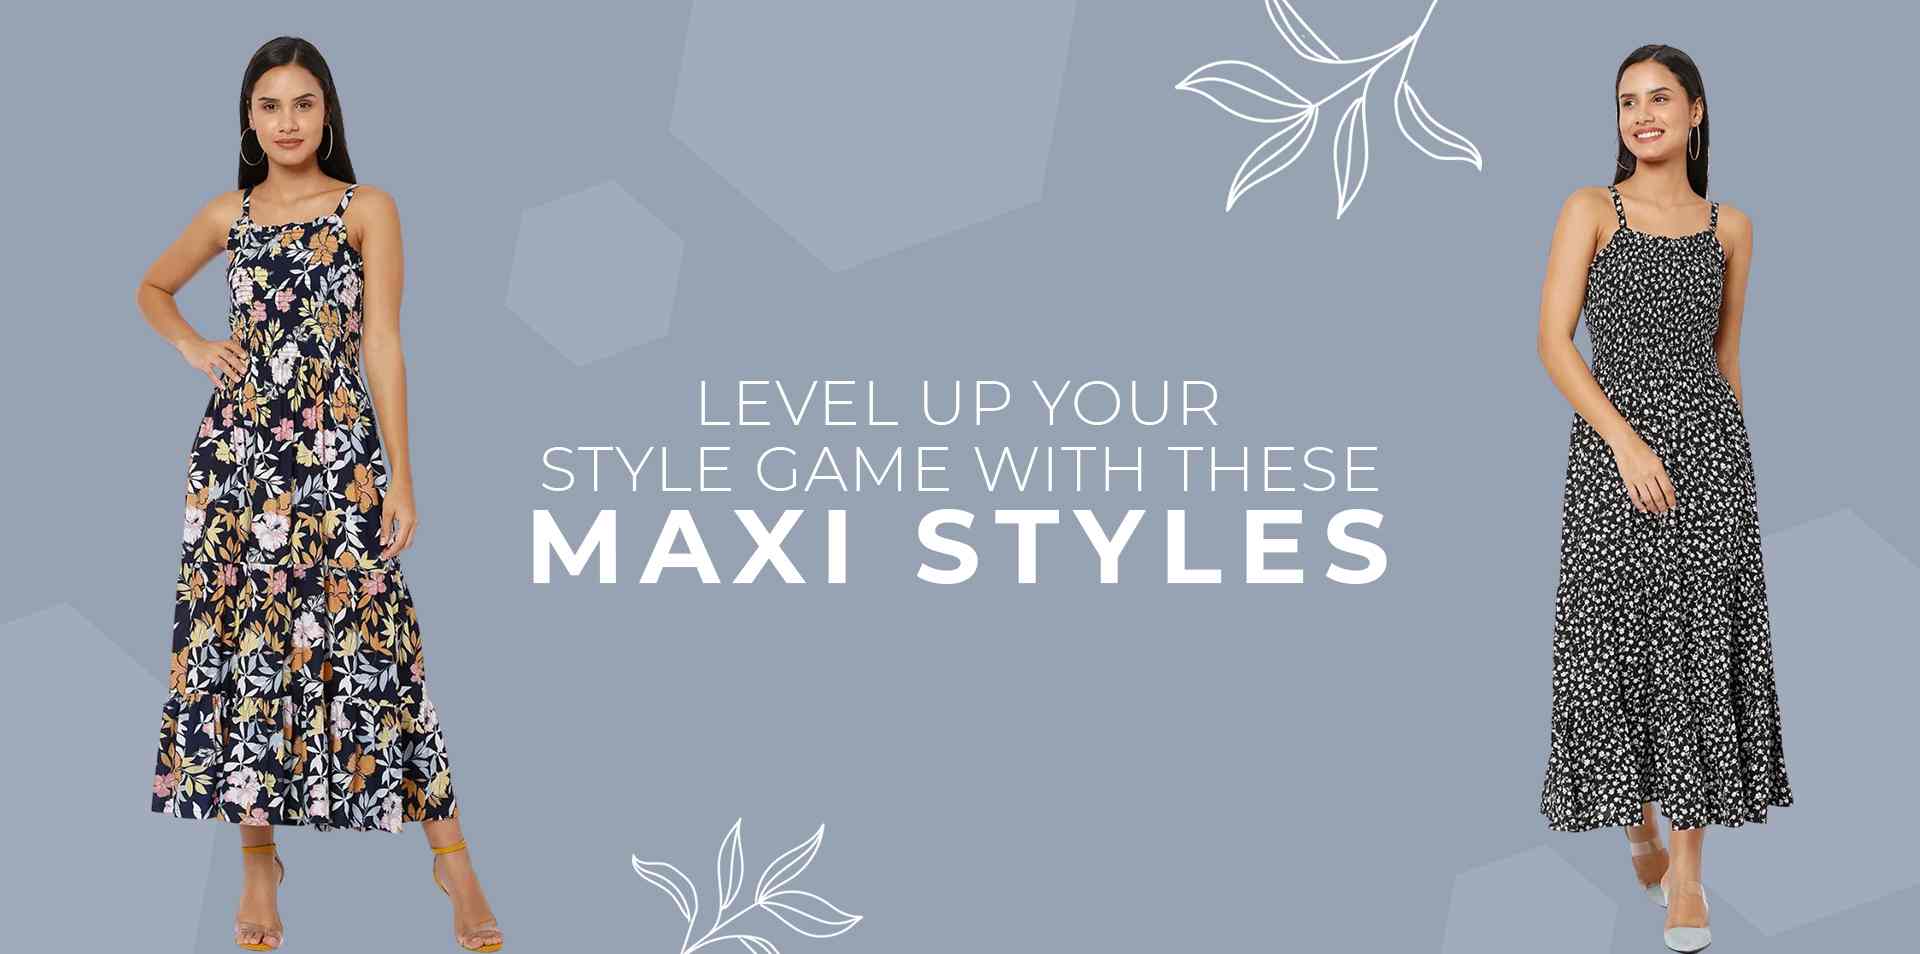 Level up your style game with these maxi dresses